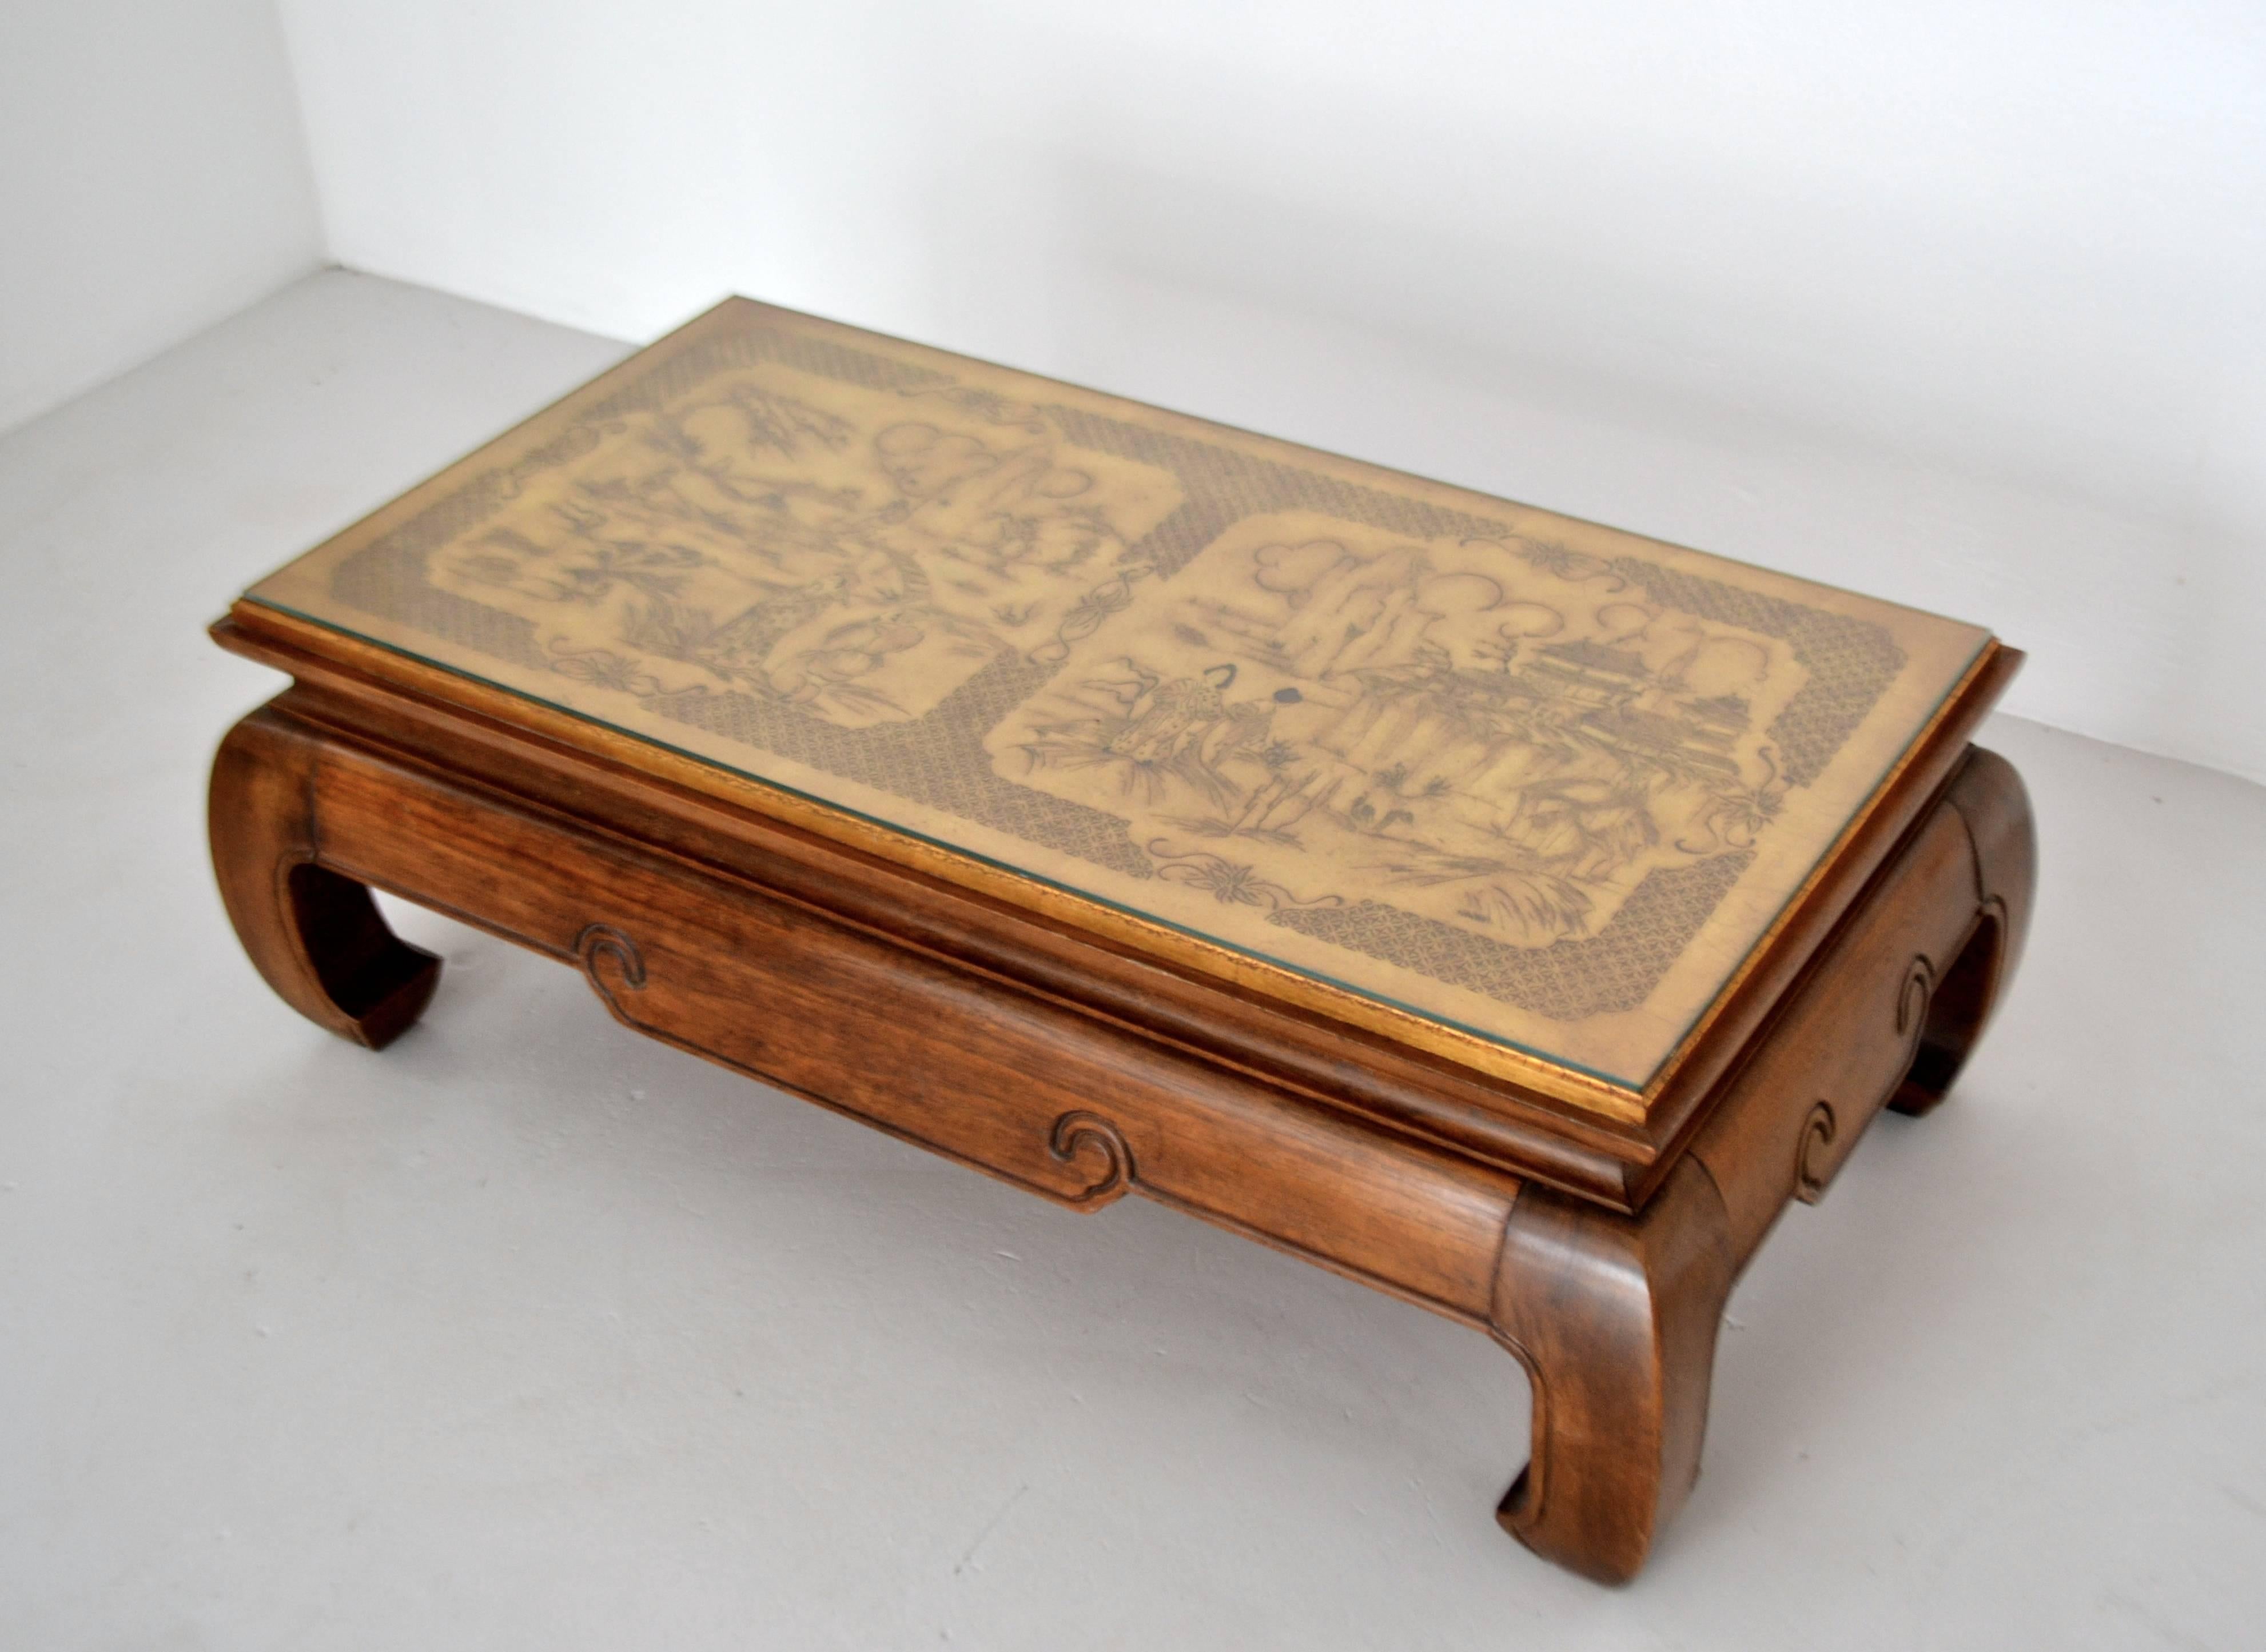 Stunning Hollywood Regency elmwood coffee table, circa 1950s. This striking artisan crafted hardwood cocktail table is designed with a gilt accented chinoiserie inspired hand etched wooden top.